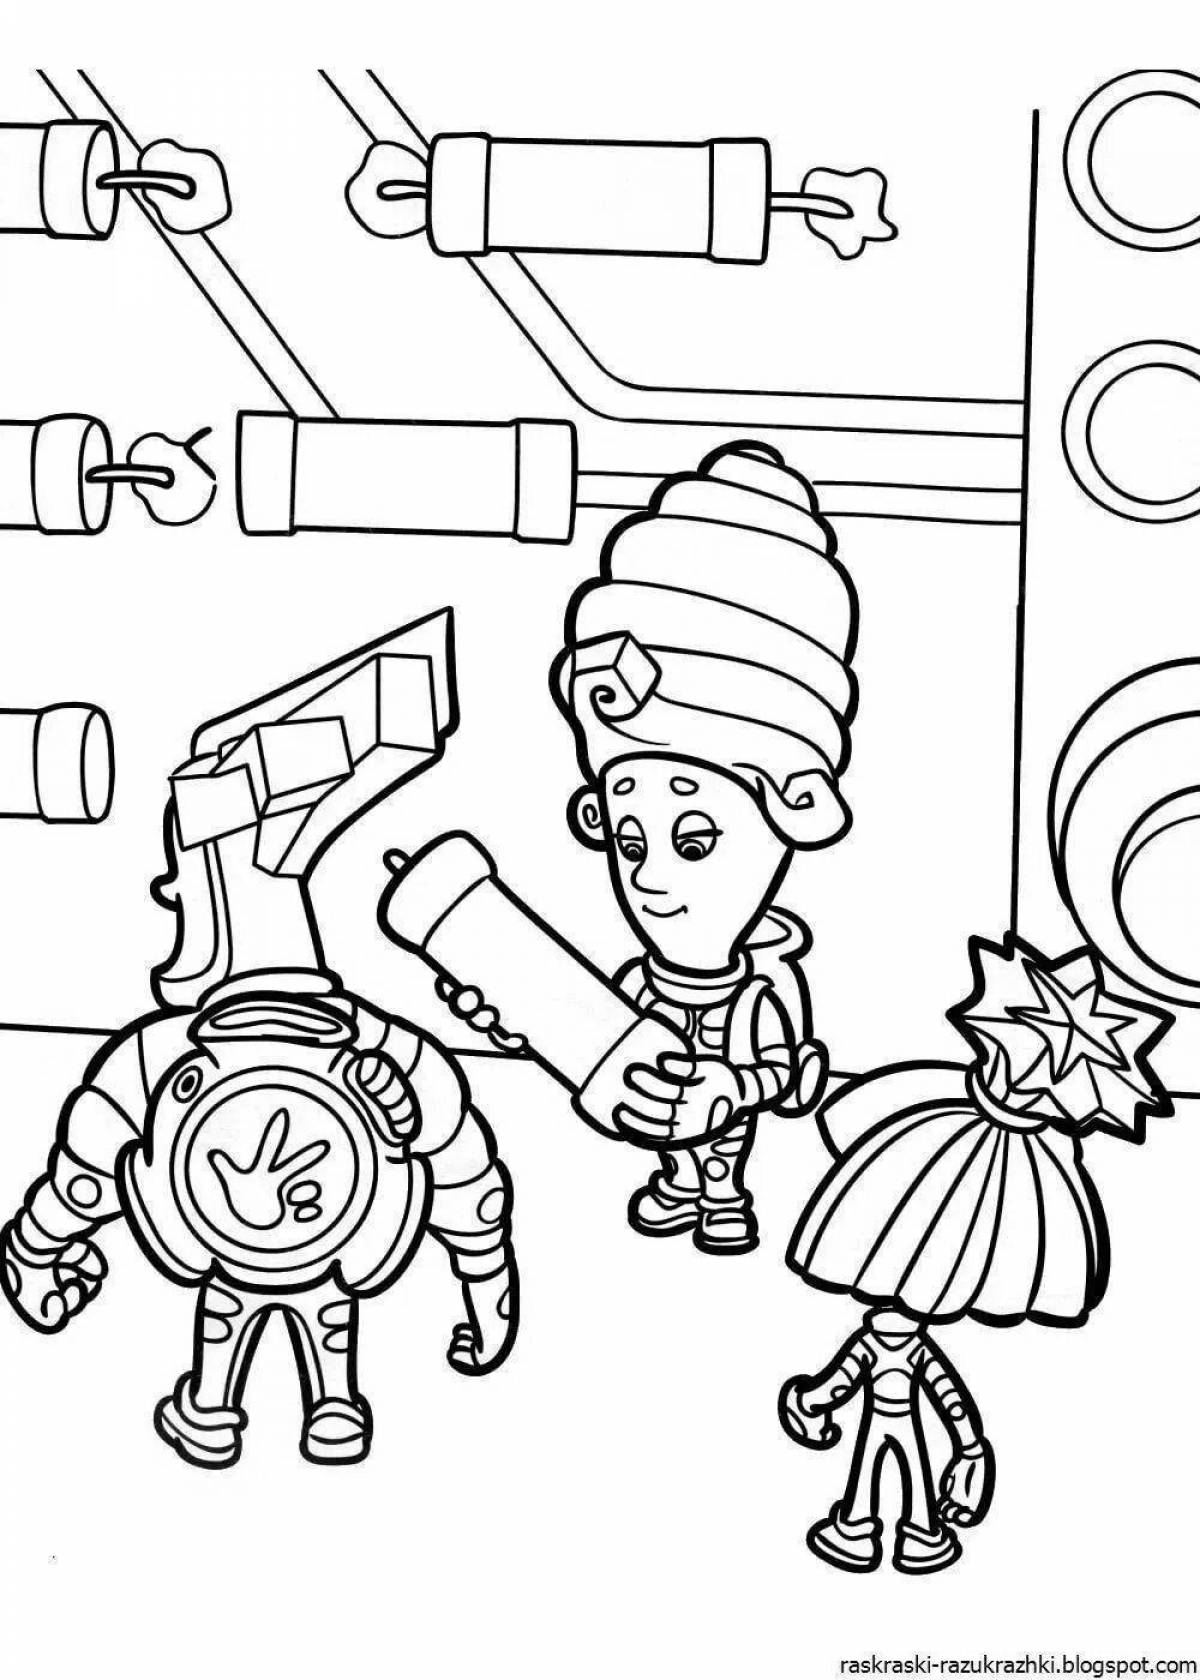 Bright fixies coloring pages for kids